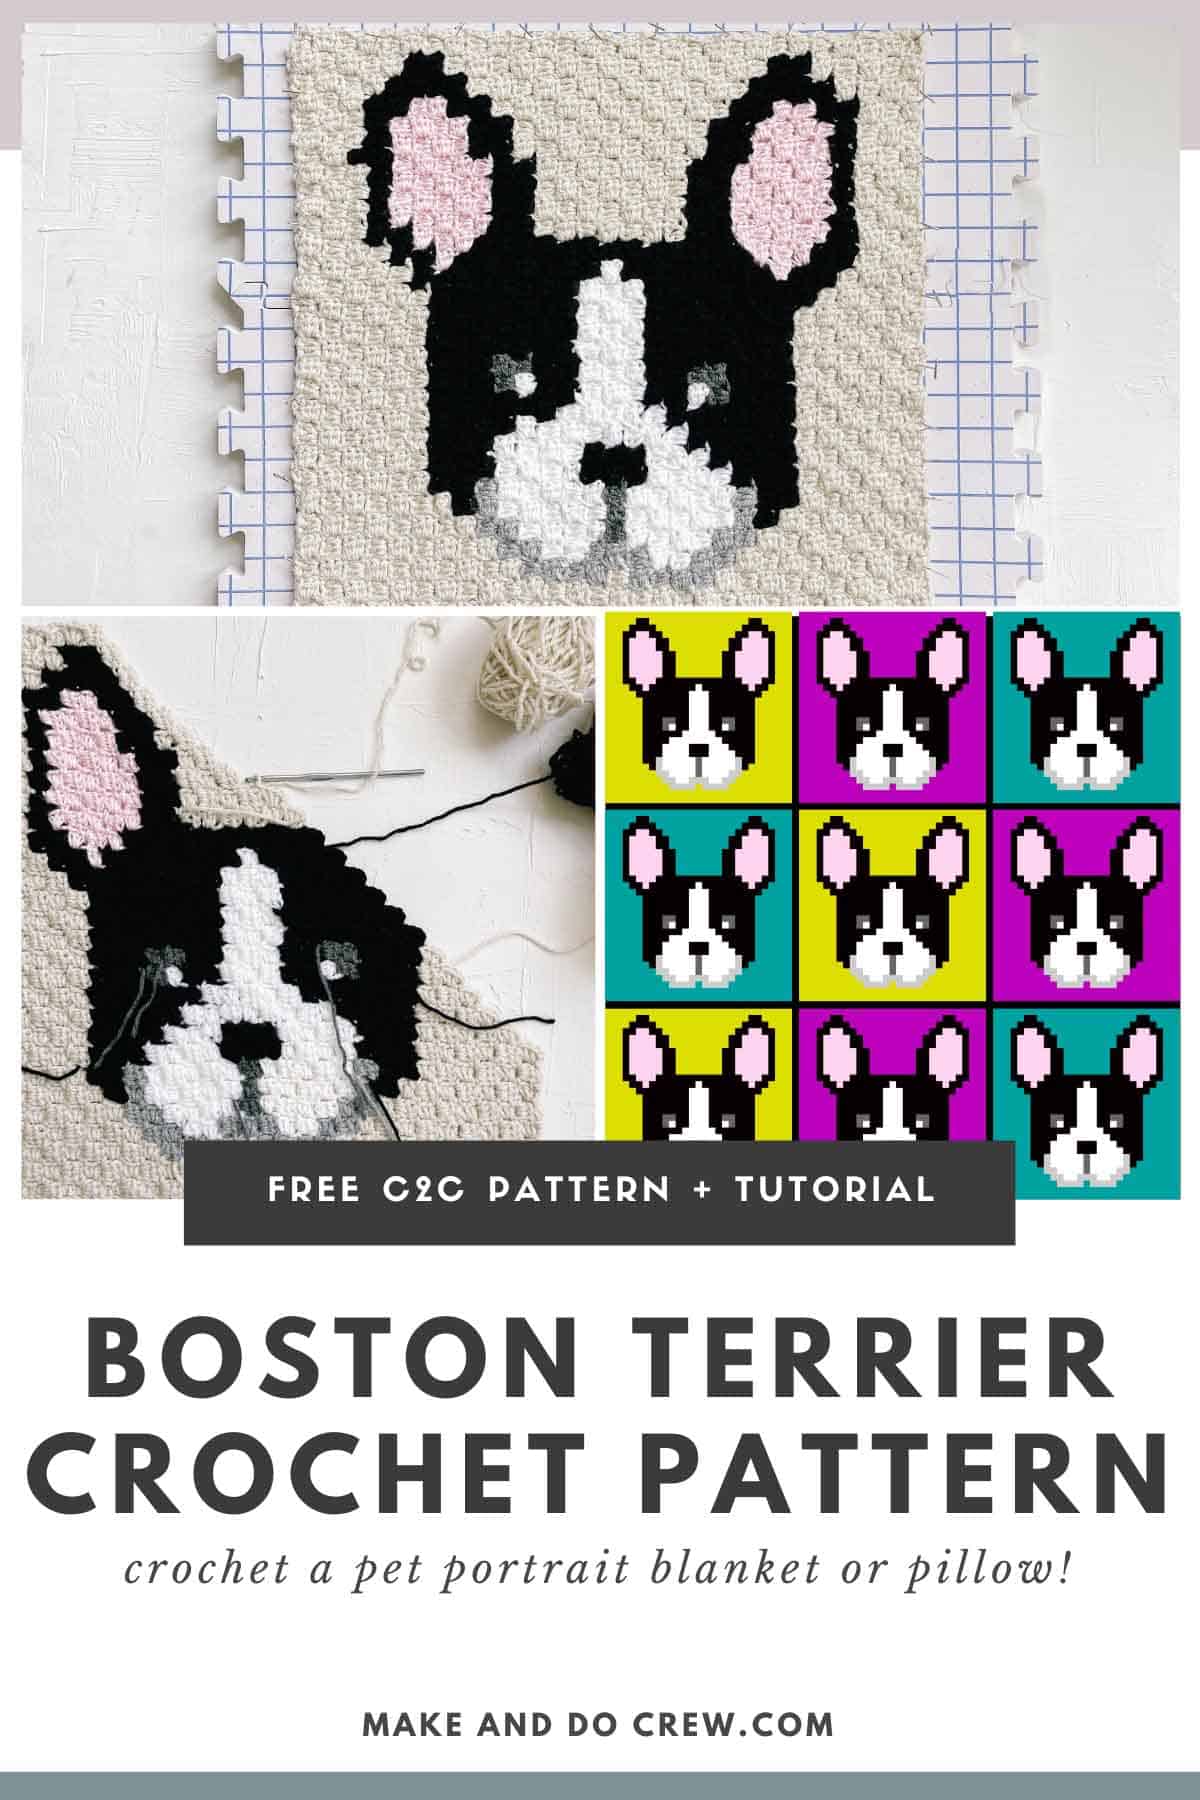 This image shows a Pinterest image for a free corner to corner crochet square for a french bulldog.